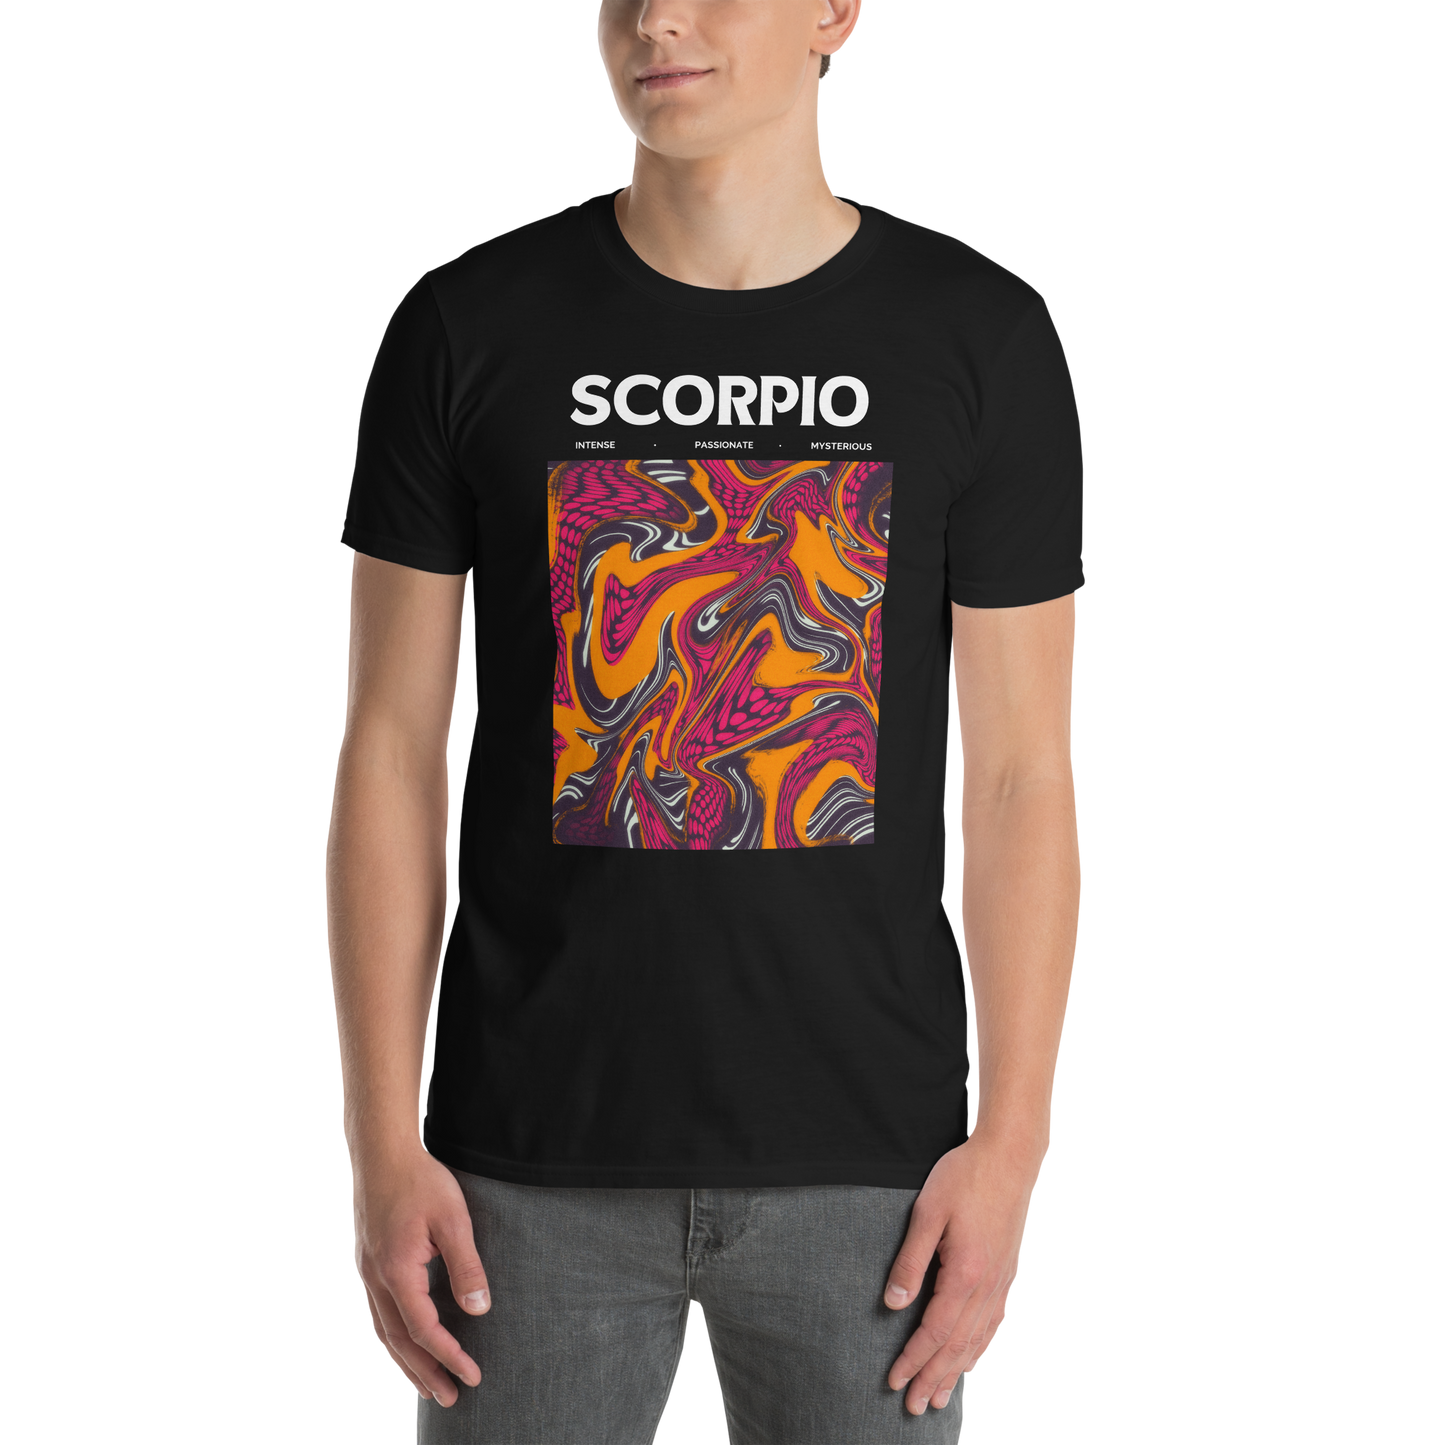 Man wearing a Black Scorpio T-Shirt featuring an Abstract Scorpio Star Sign graphic on the chest - Cool Graphic Zodiac T-Shirts - Boozy Fox